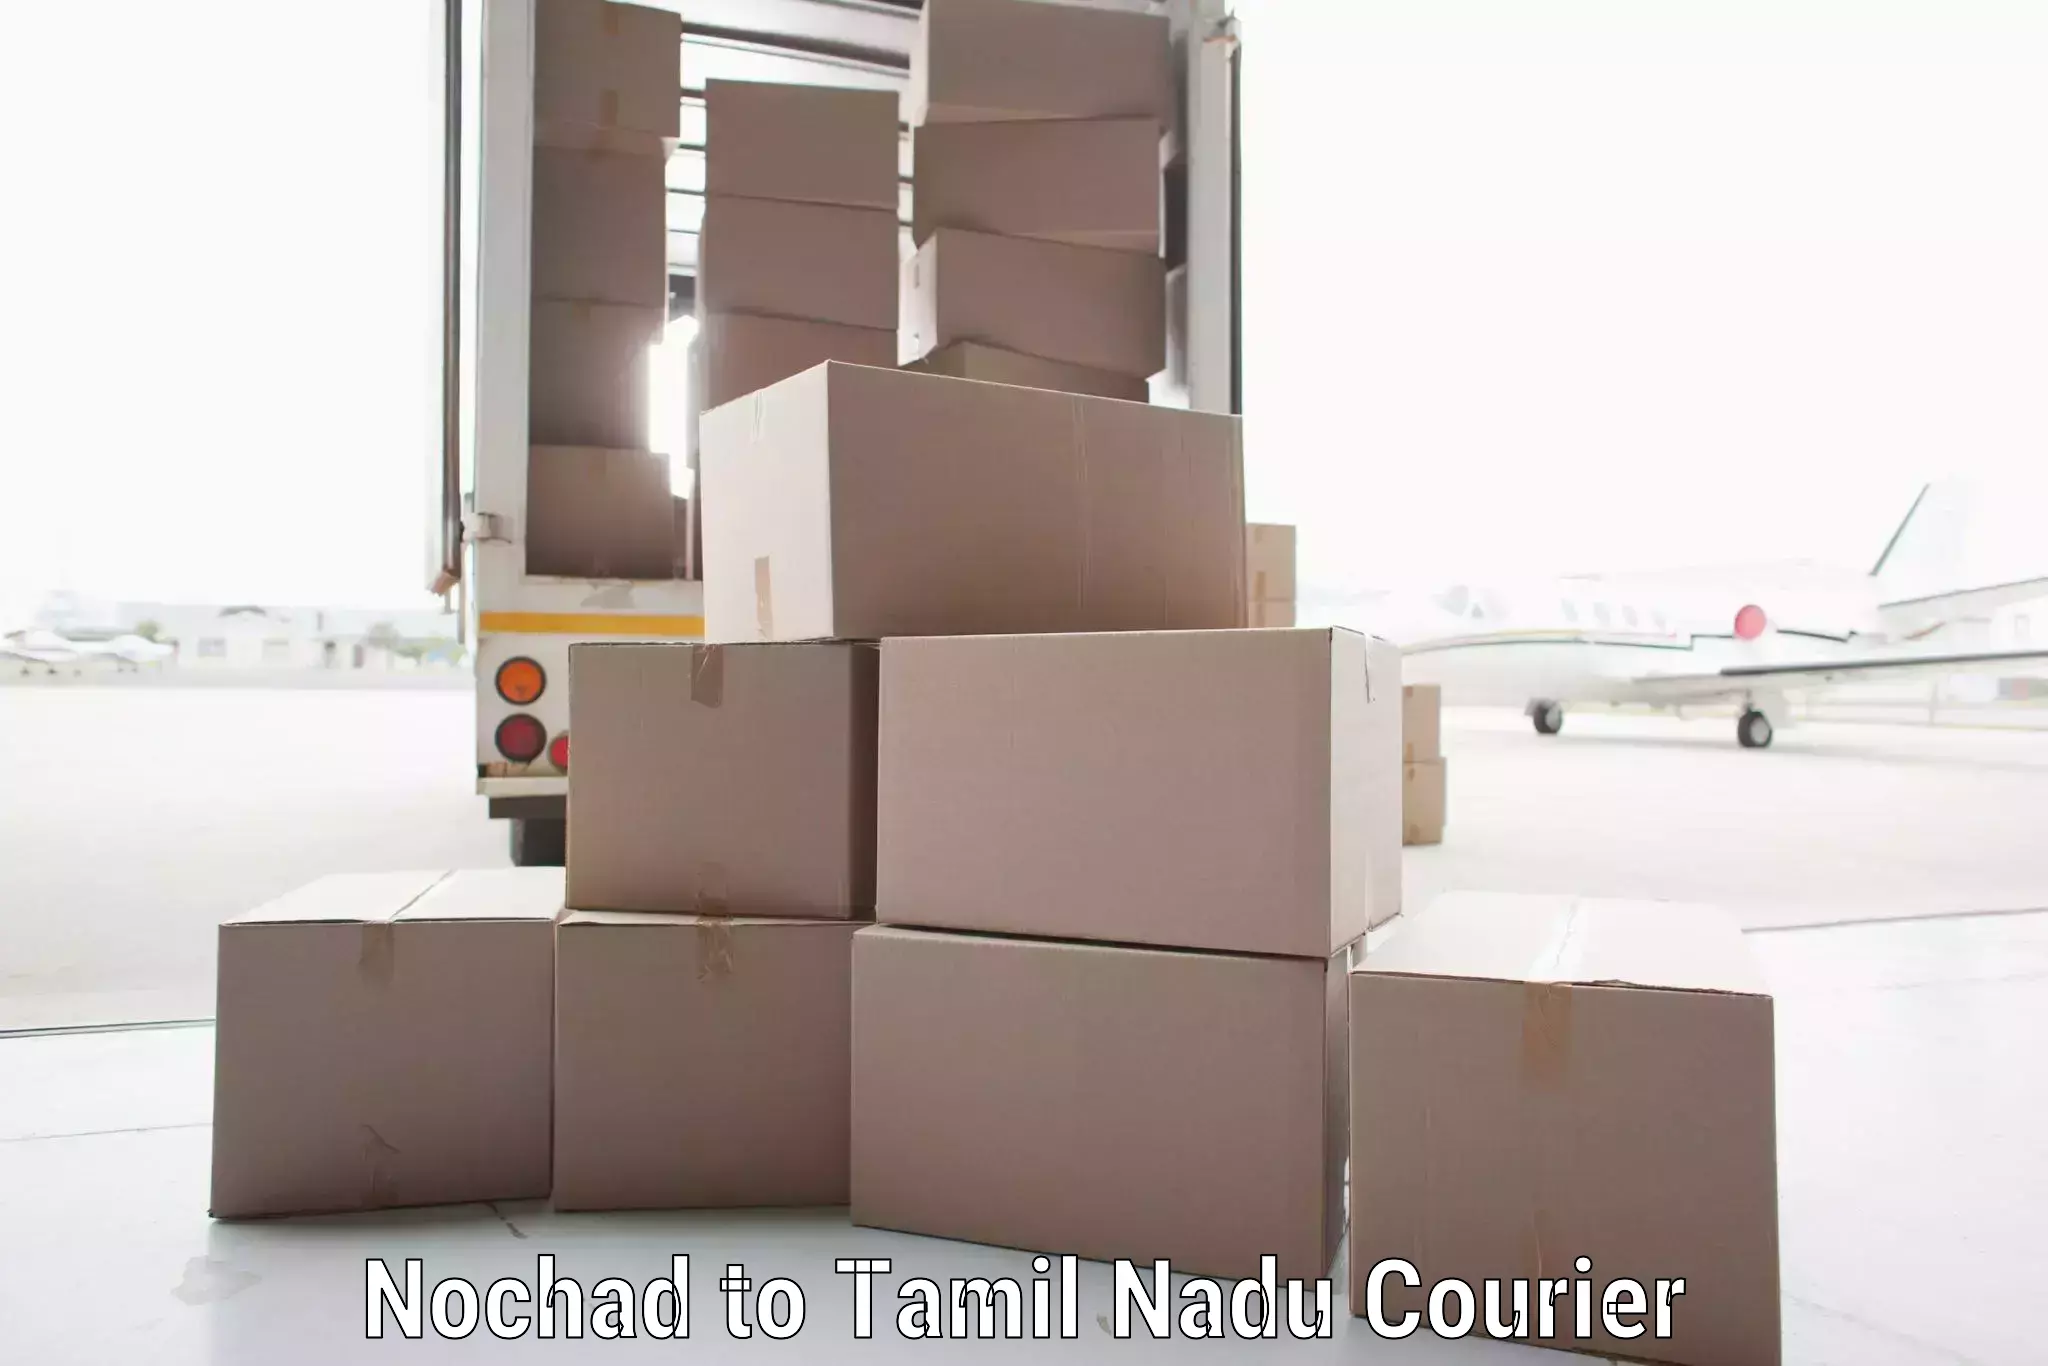 Nationwide shipping coverage Nochad to Coimbatore